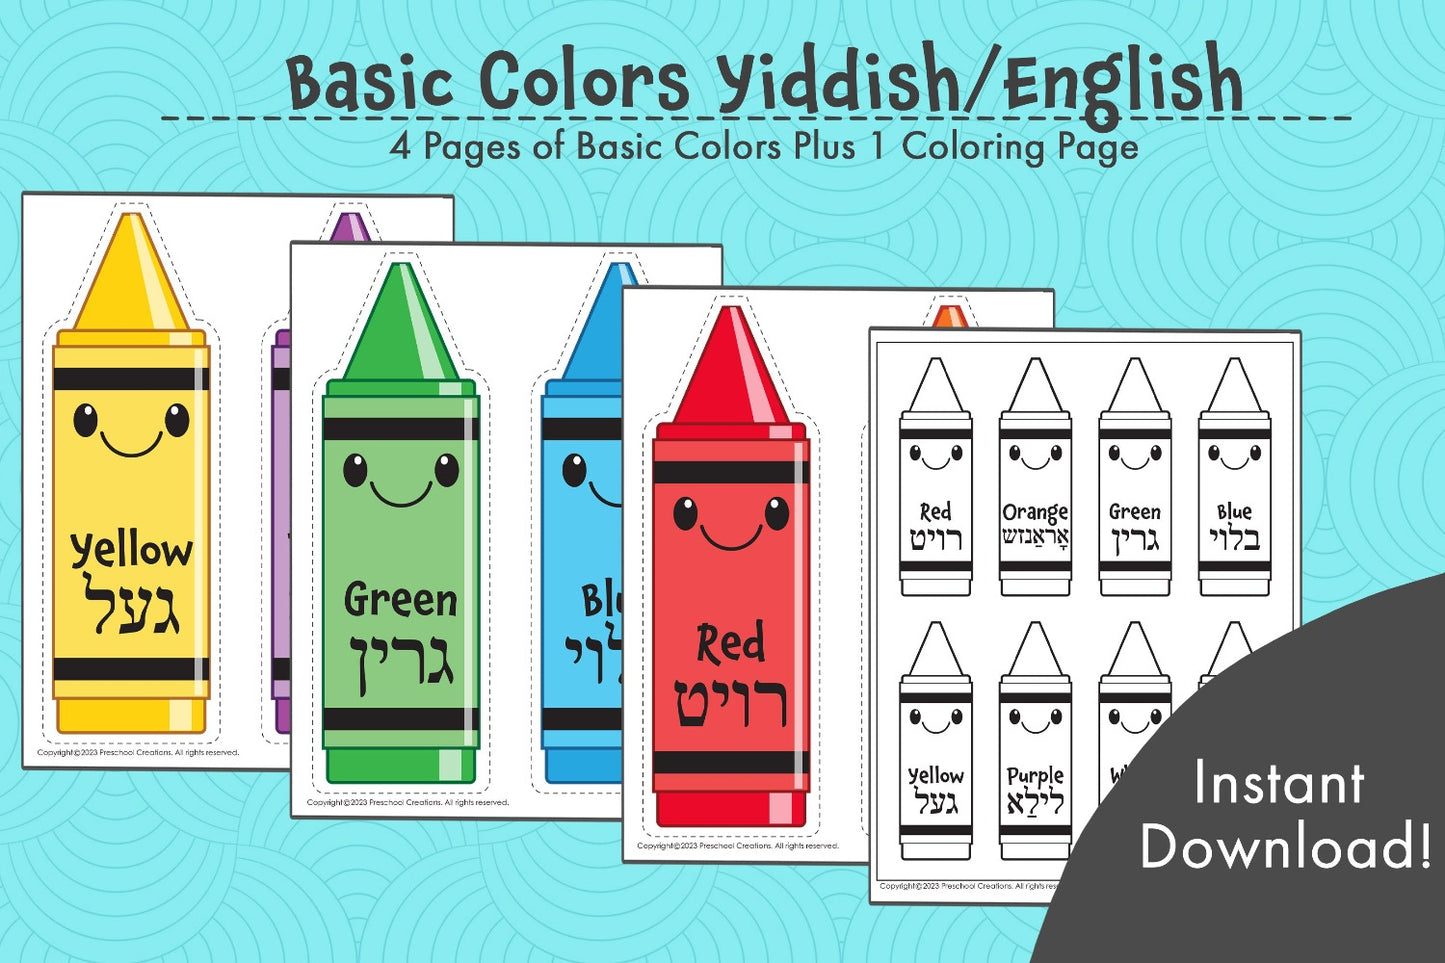 4 pages of basic colors + bonus coloring page  Brighten up your classroom with our Basic Colors posters in Yiddish/English! This eye-catching décor will add color and style to your space while teaching your students a valuable lesson - learning fun colors in a second language! Bring your classroom to life with this vibrant decoration!   Includes a special bonus coloring page so your students can test their knowledge.